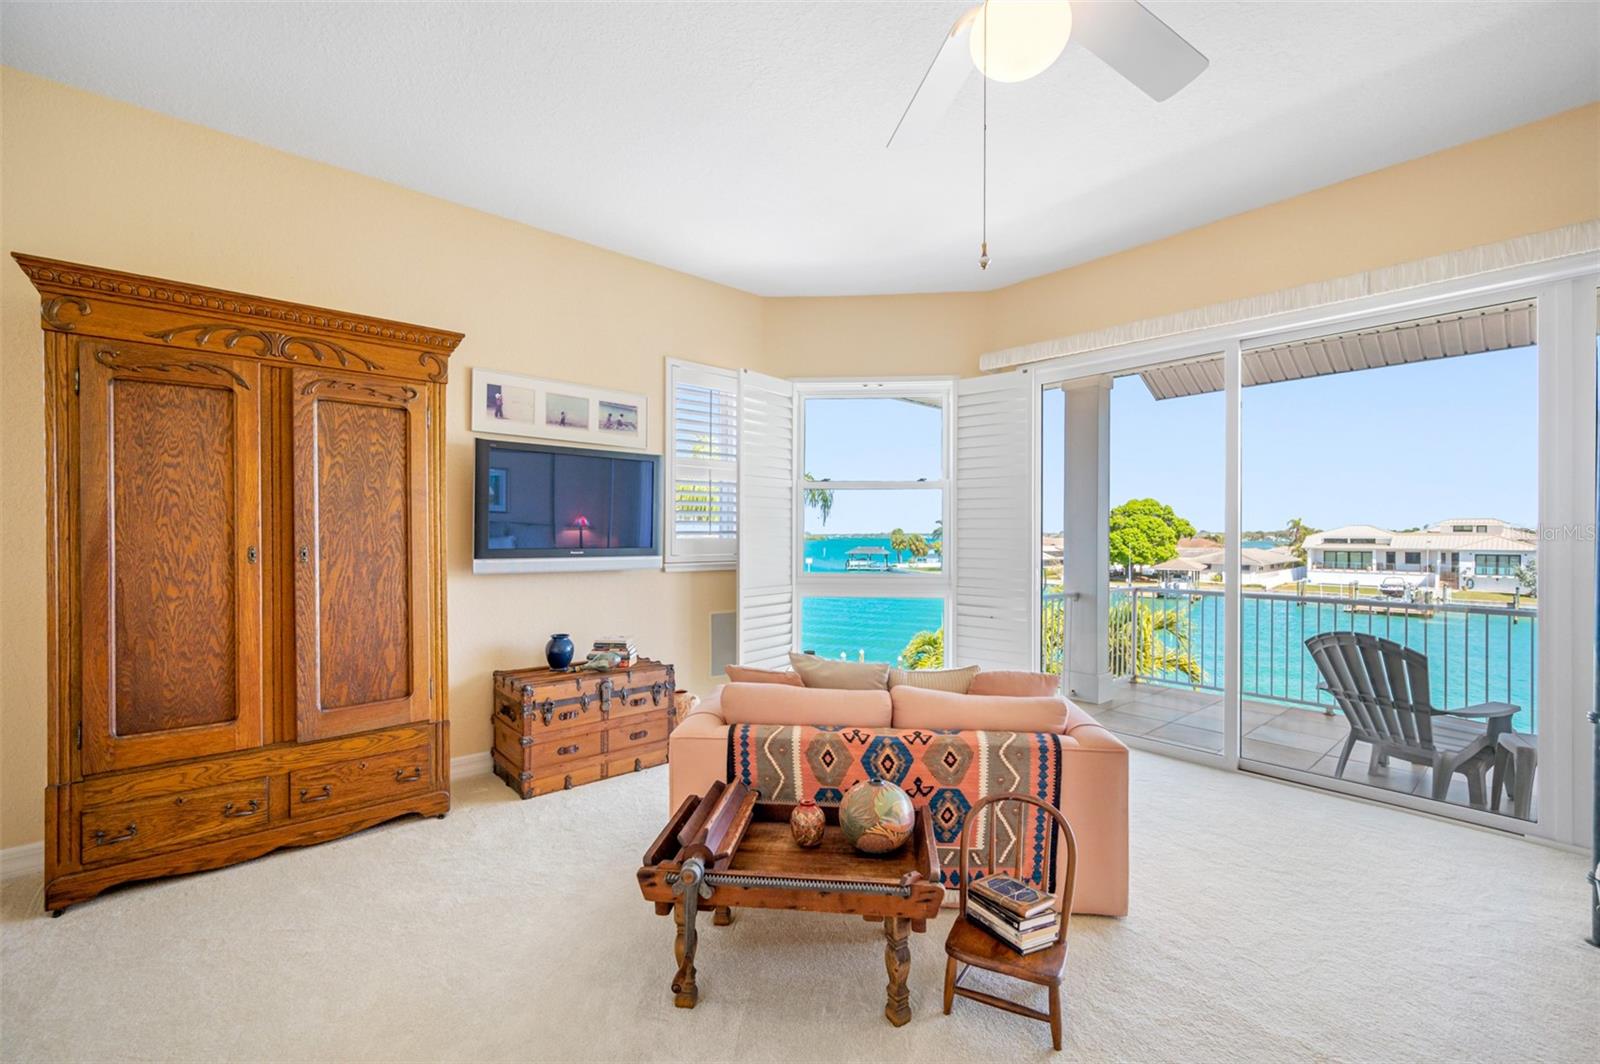 Additional view of primary bedroom suite sitting area and views of the Clearwater Harbor